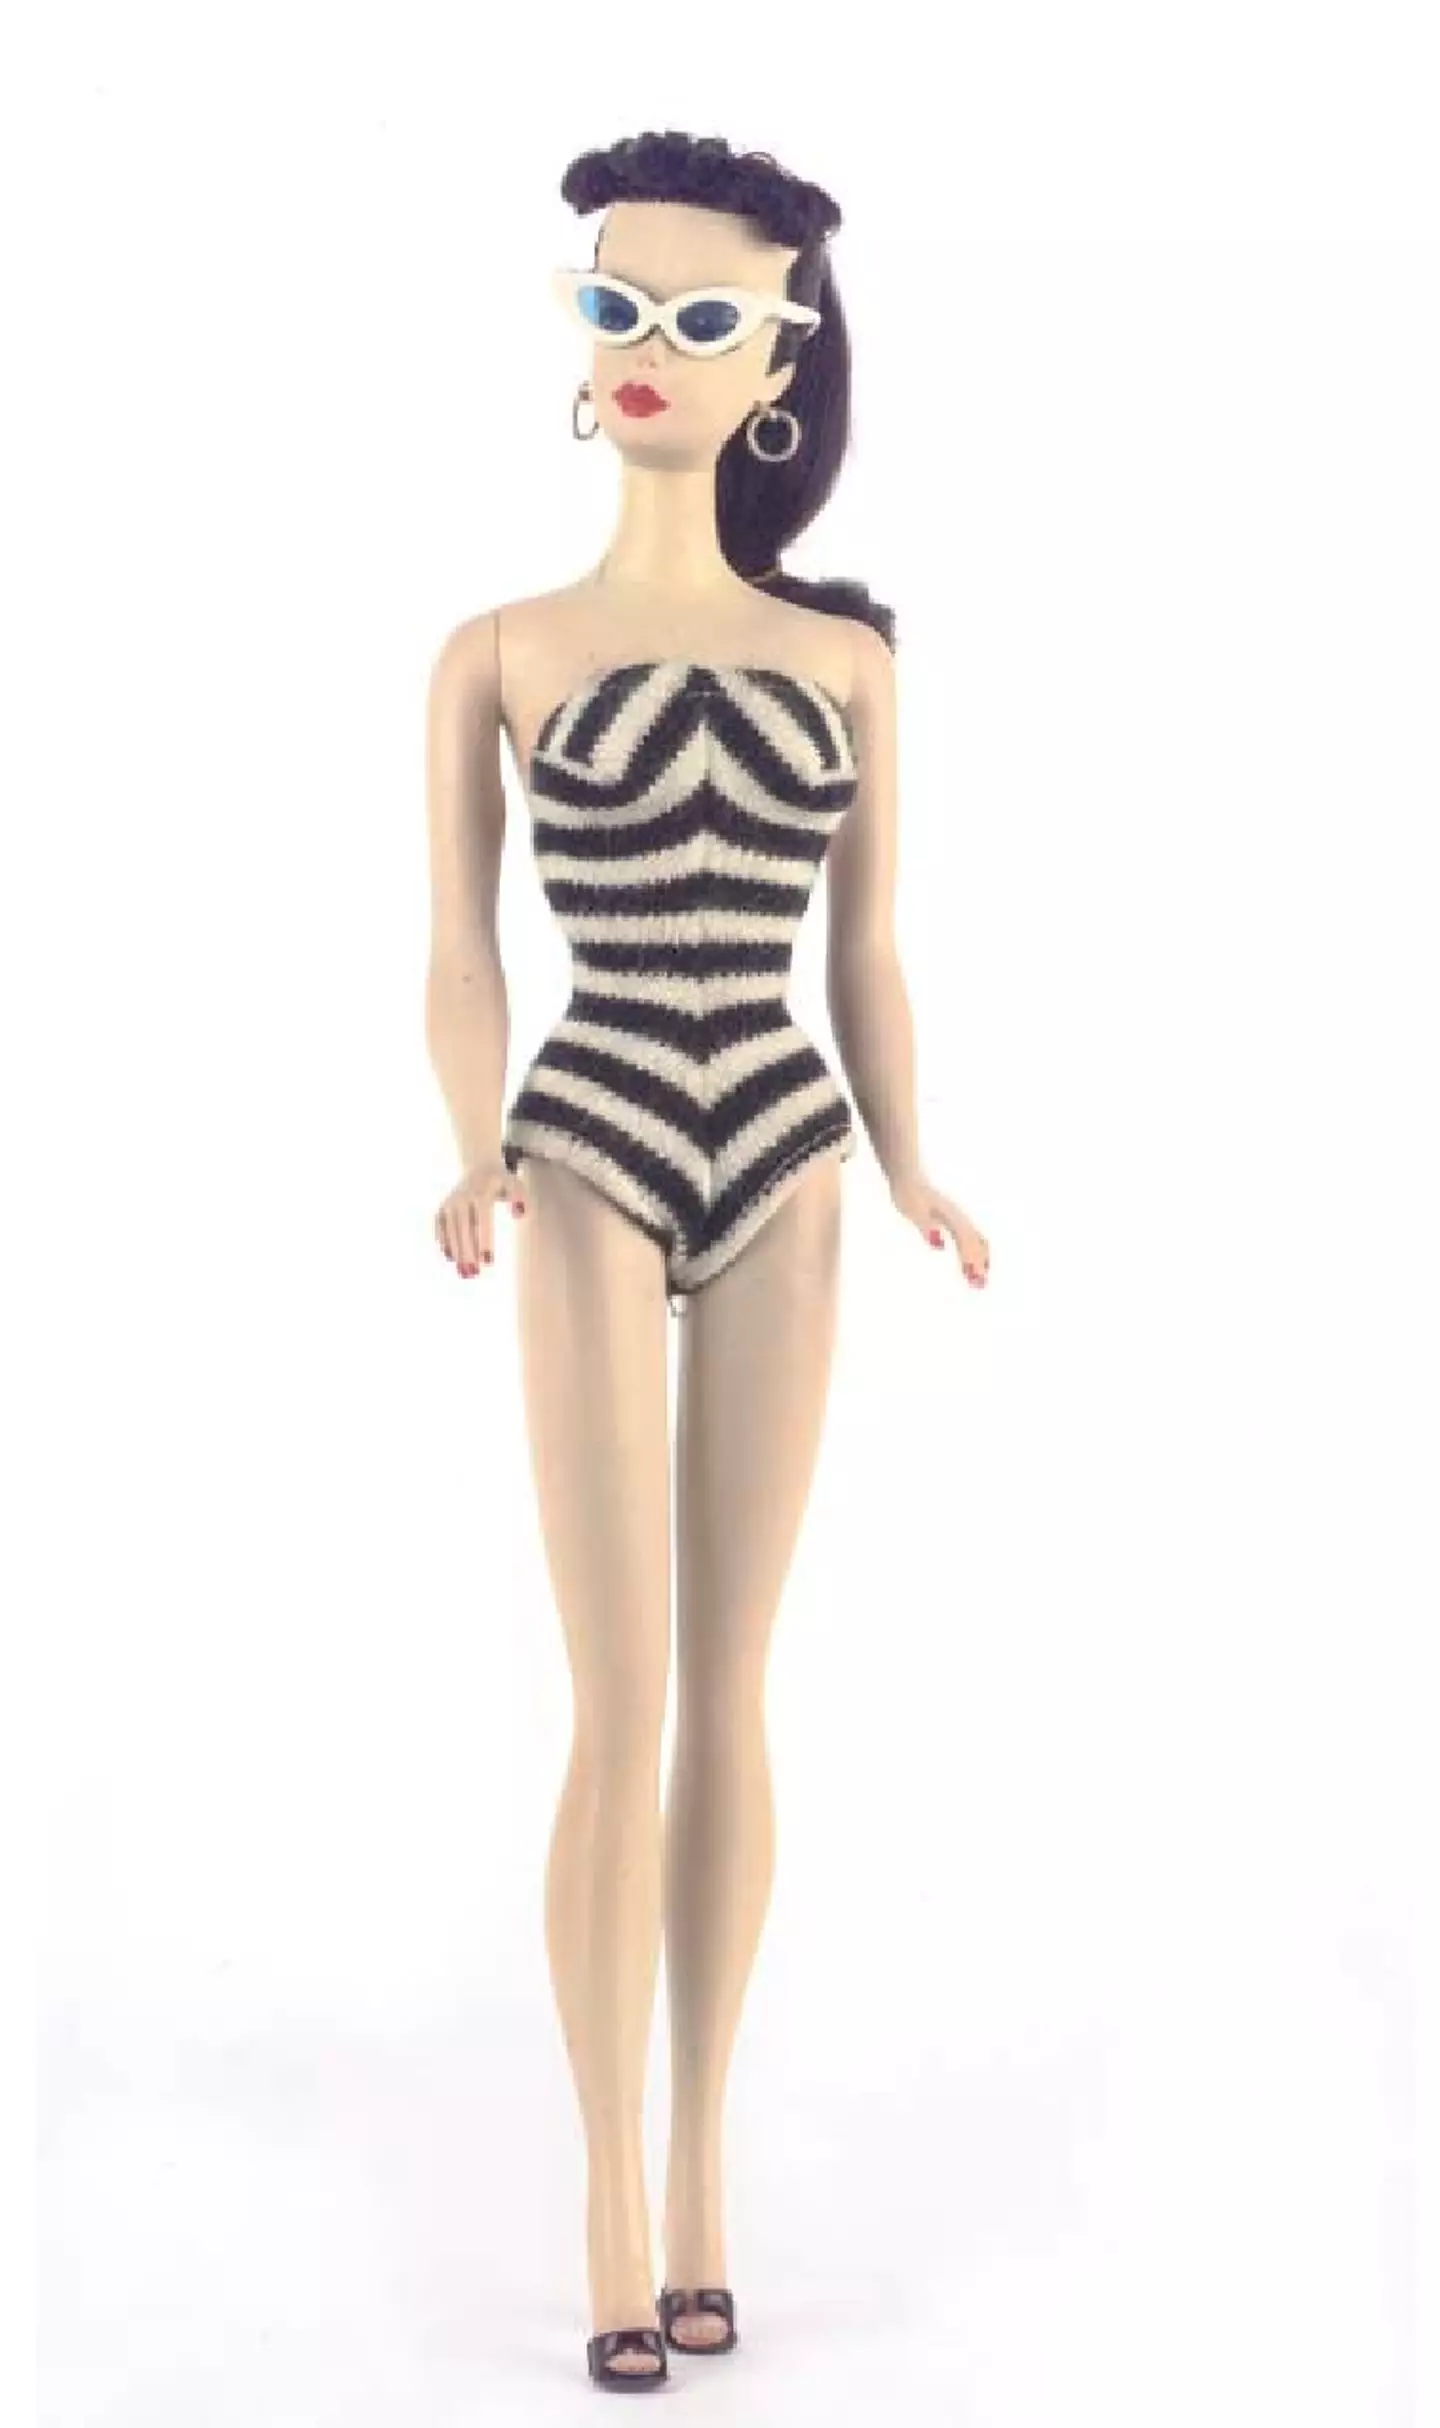 A Number One Barbie which sold at Christie's for £2,880 in 2006.